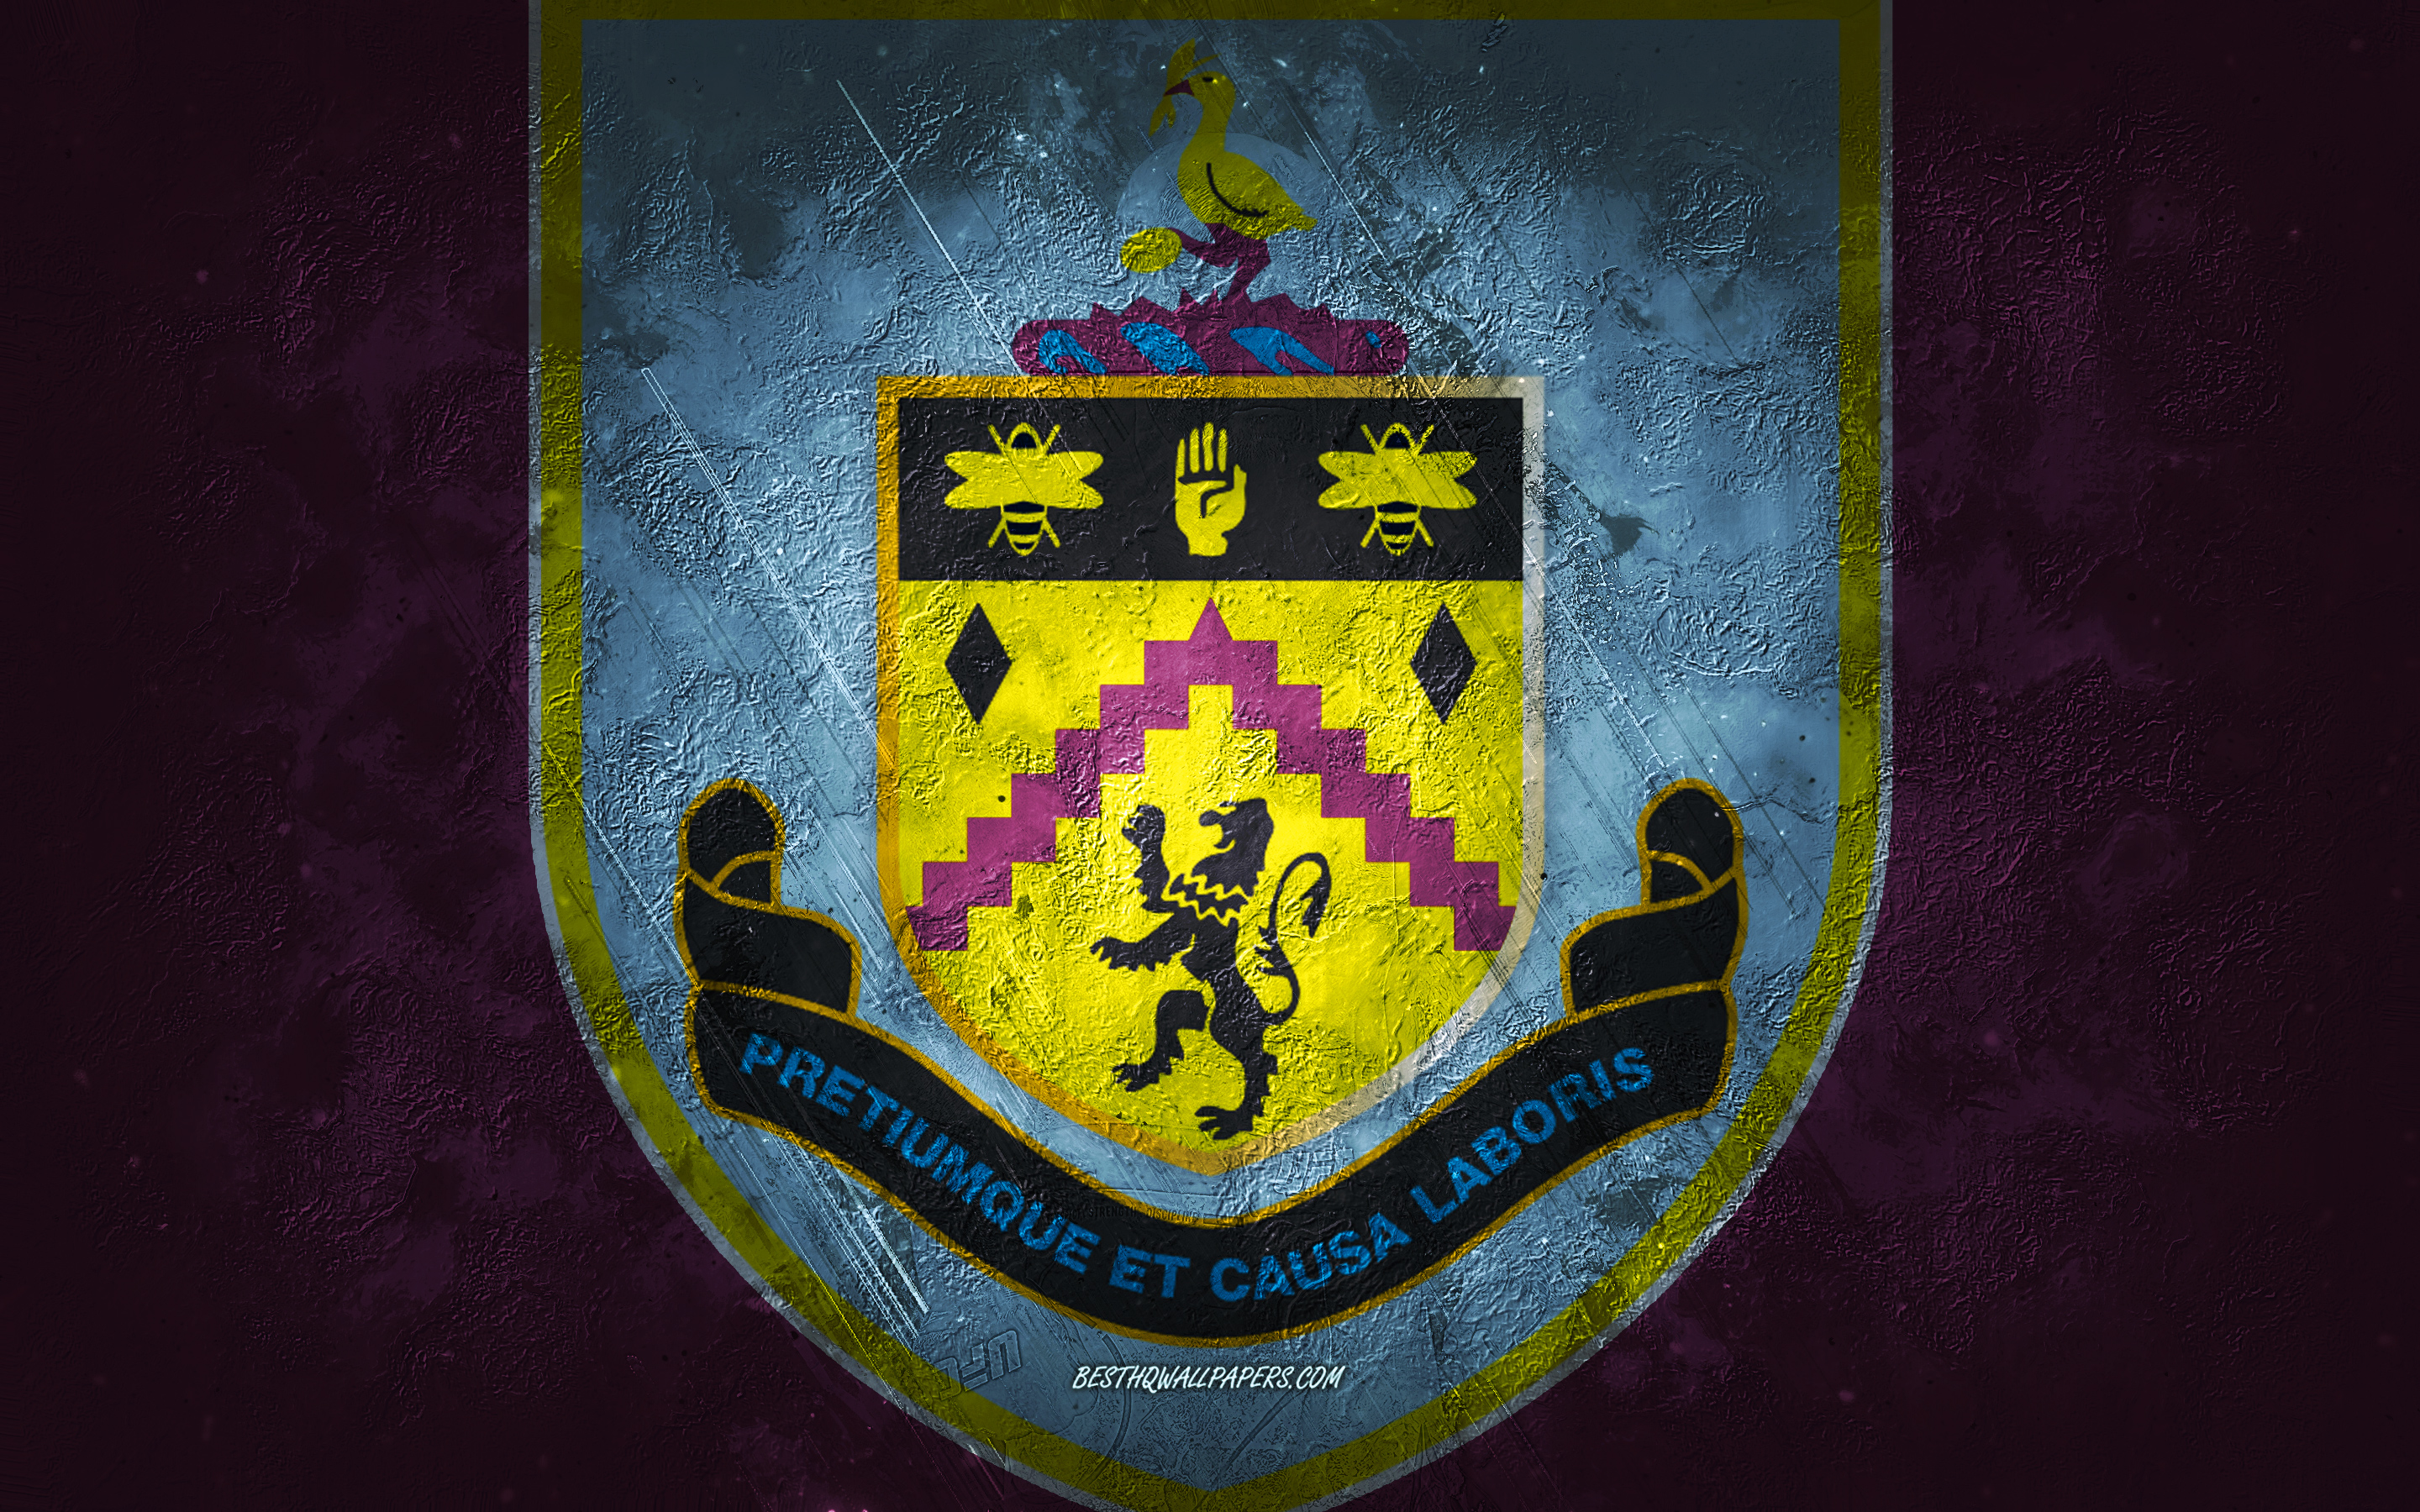 Download wallpapers Burnley FC, English football club, purple stone  background, Burnley FC logo, grunge art, Premier League, football, England, Burnley  FC emblem for desktop with resolution 2880x1800. High Quality HD pictures  wallpapers